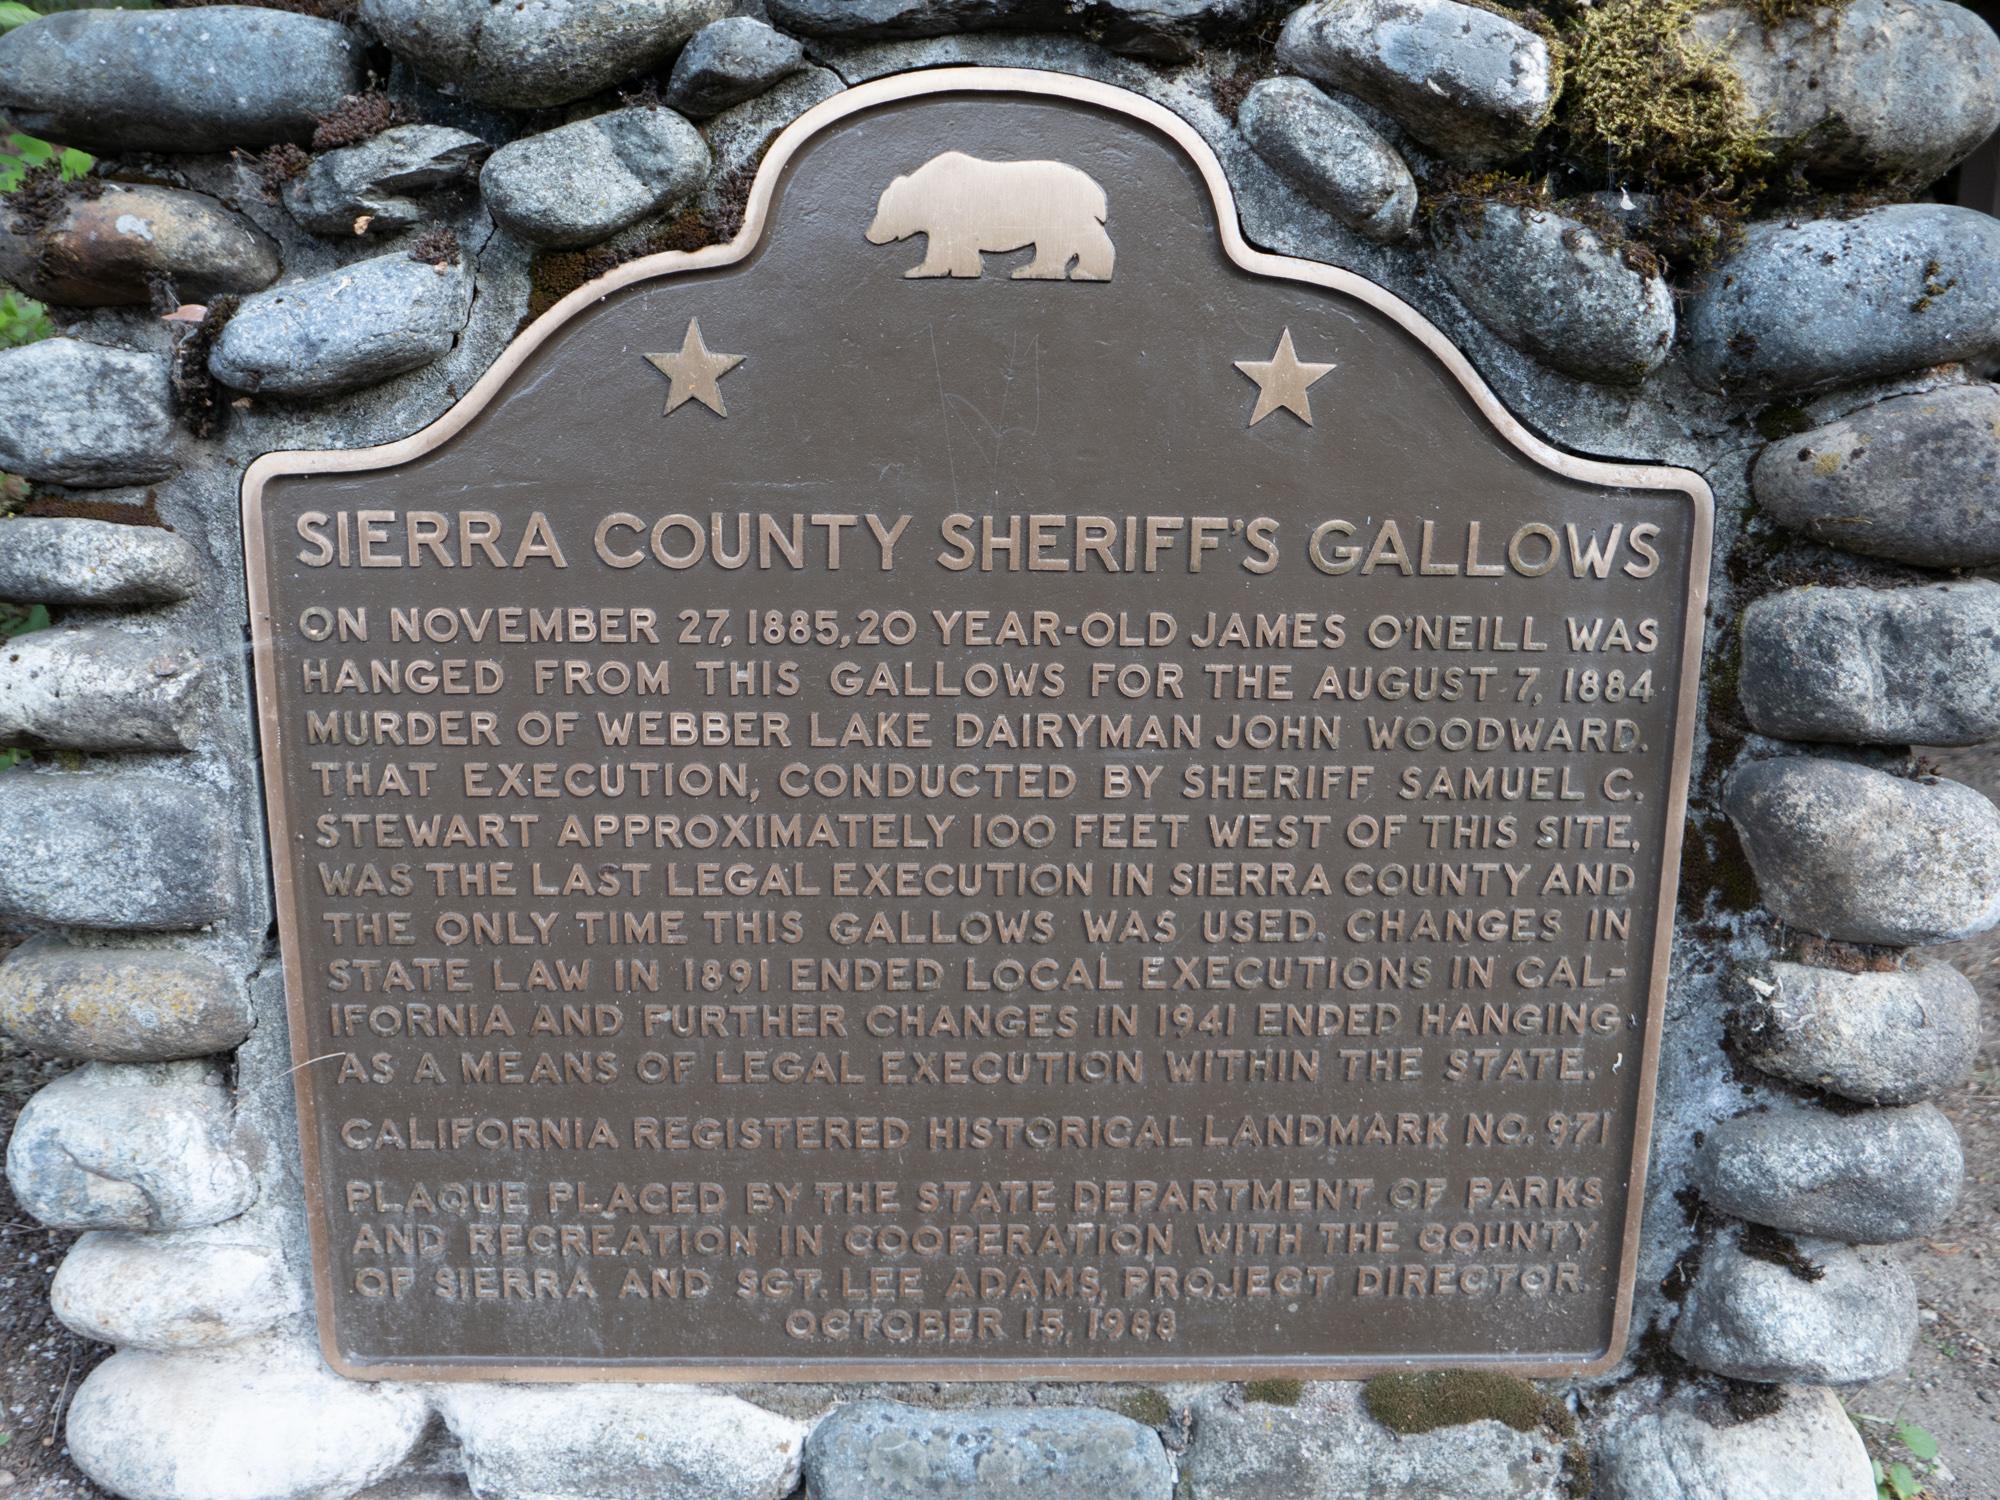 The gallows plaque